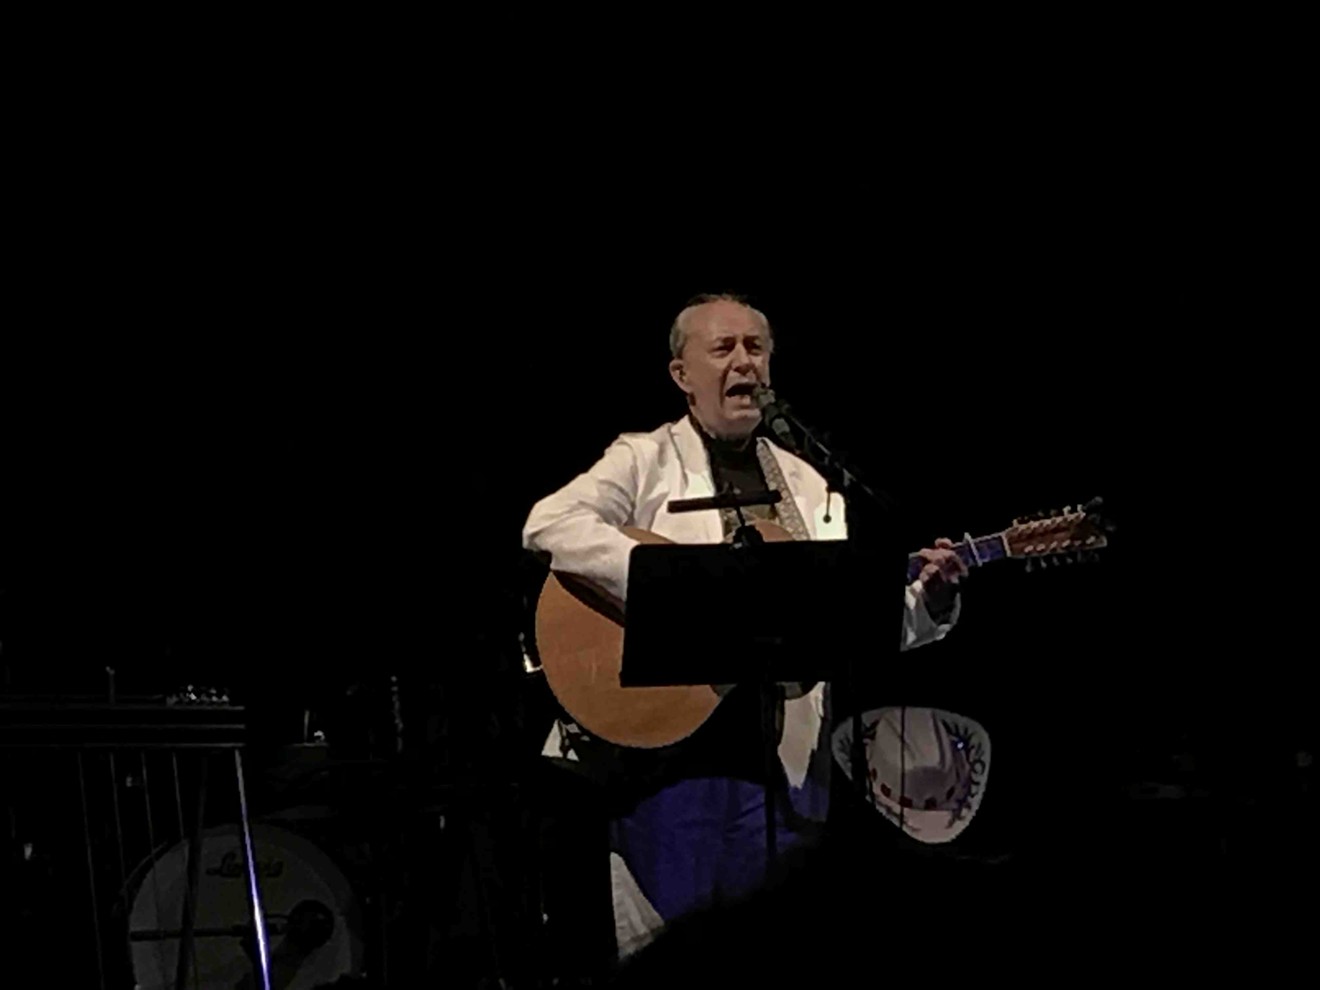 Michael Nesmith can still conjure up magic alone with his guitar.